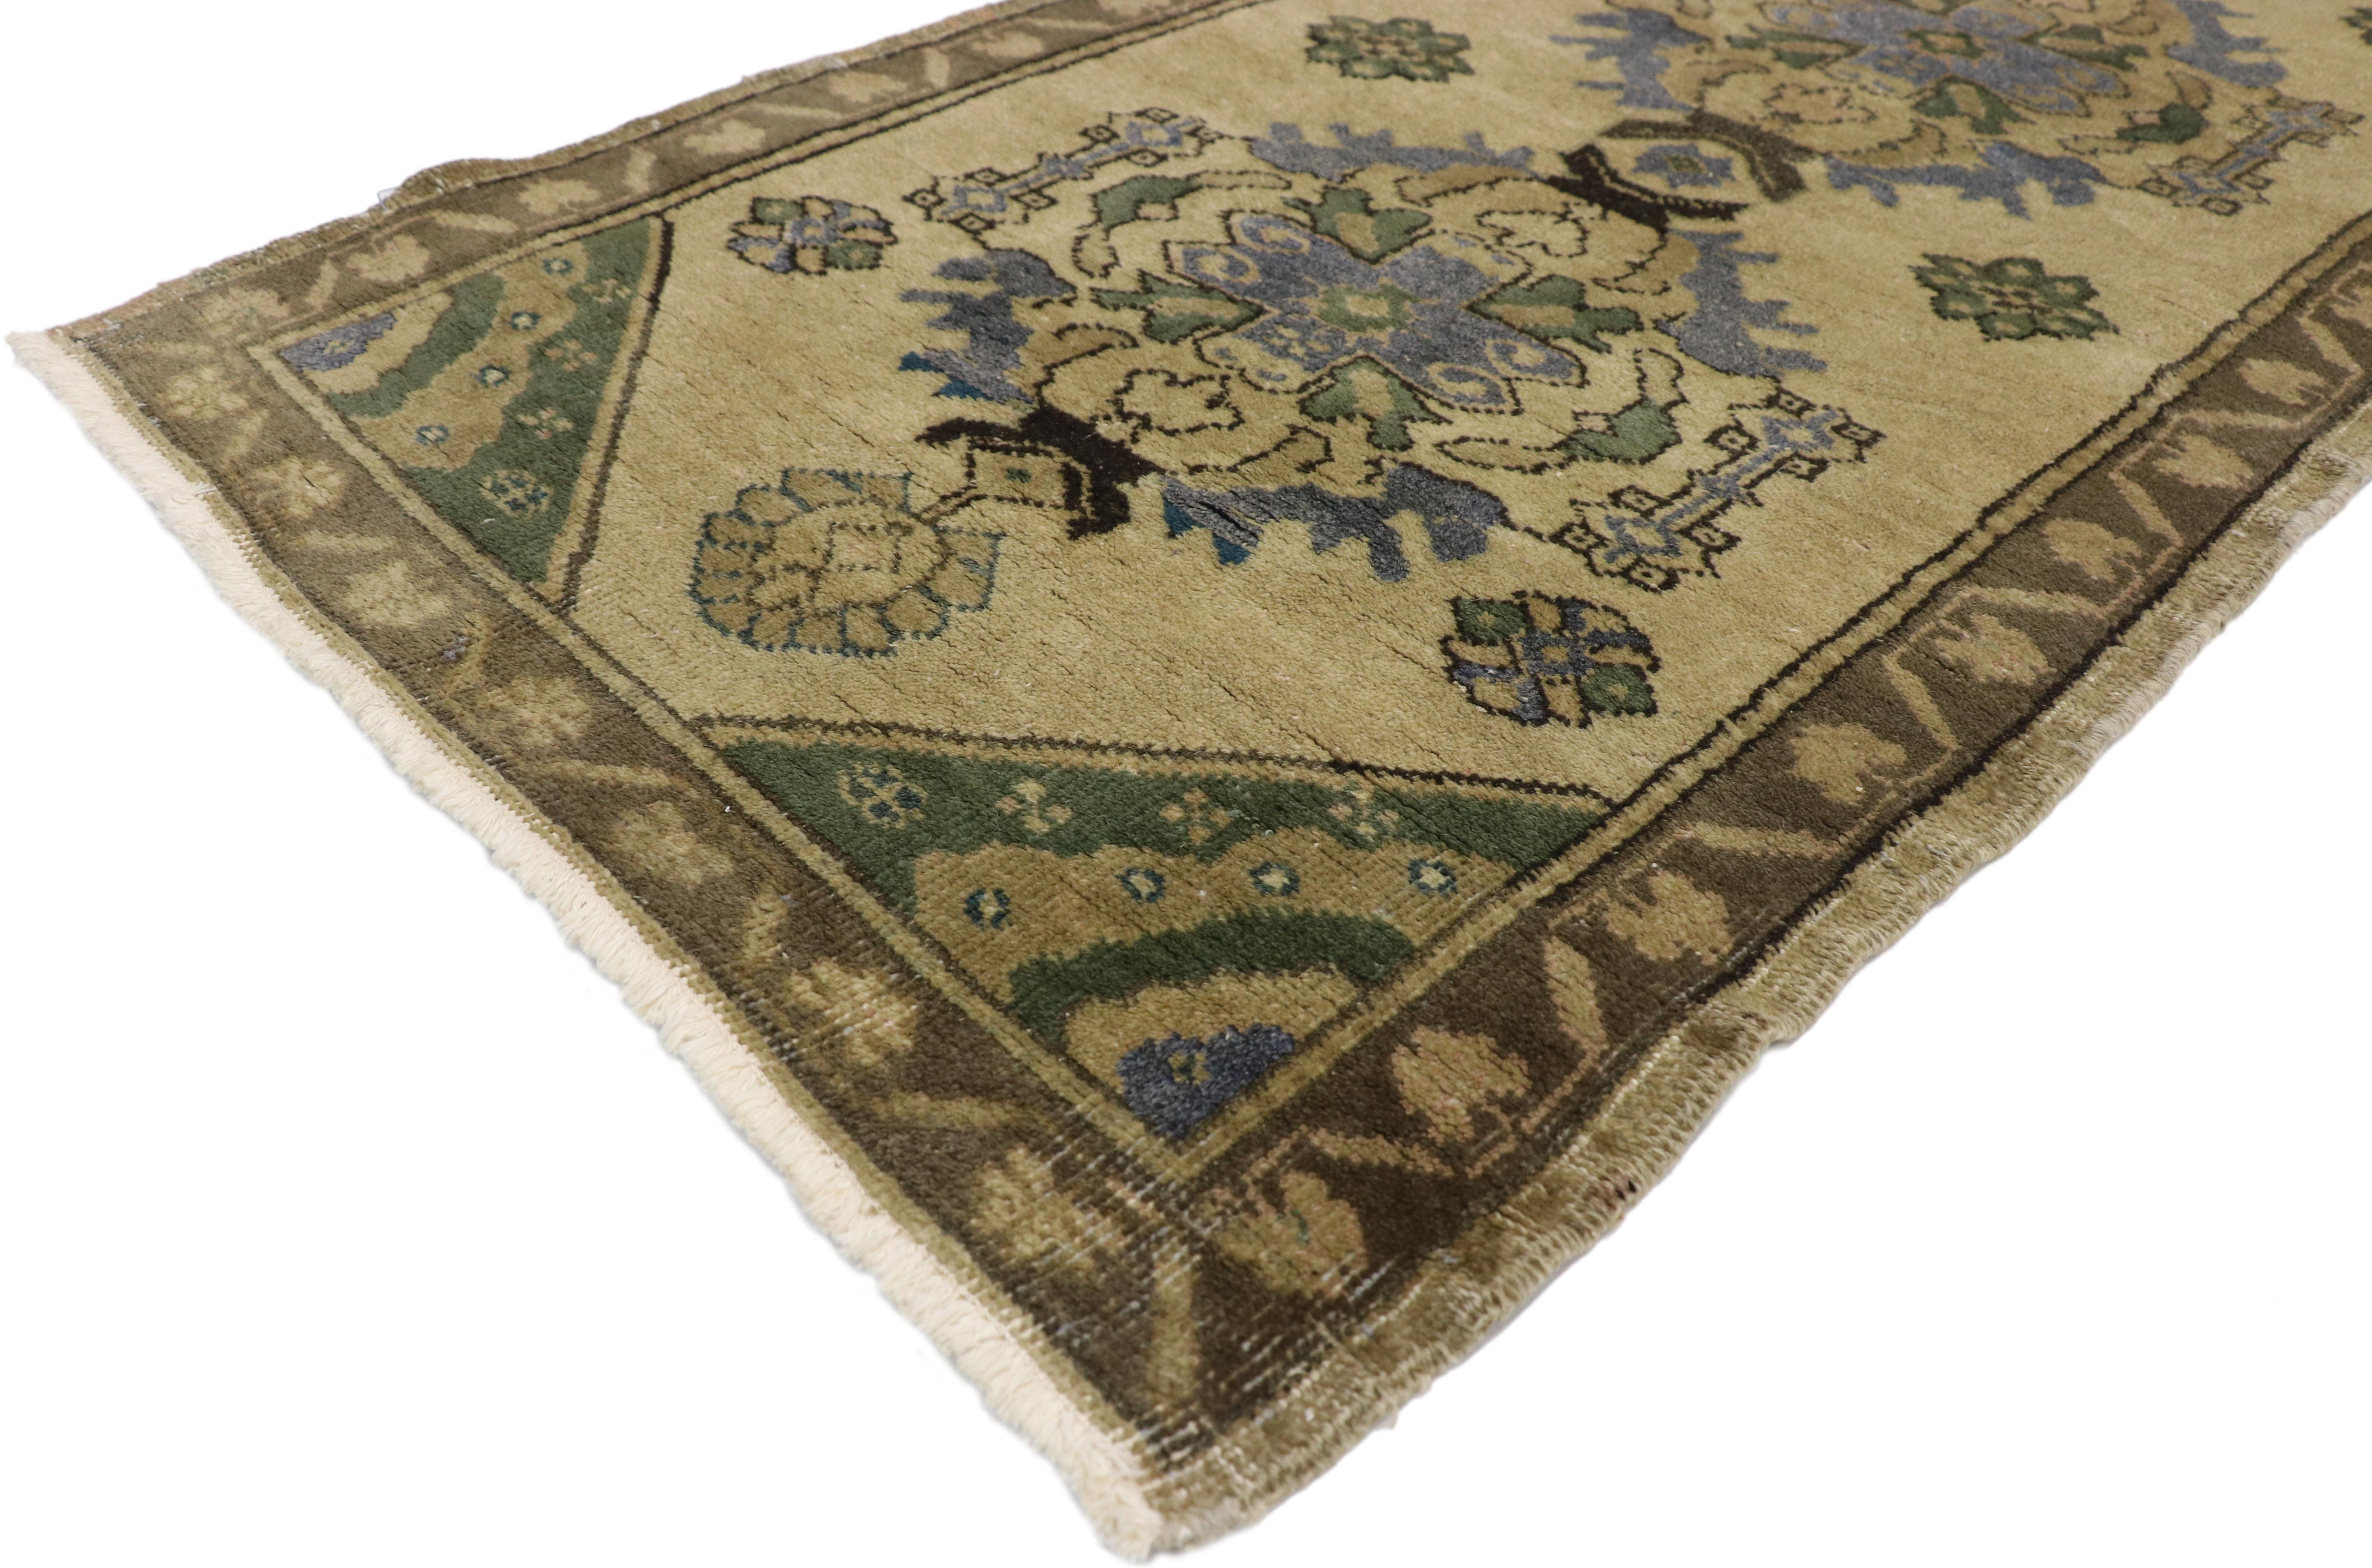 50345, Vintage Turkish Oushak Runner with Romantic Georgian Style, hallway runner. This hand-knotted wool vintage Turkish Oushak runner features six open medallions anchored with palmette pendants at either end and the ecru field is dotted with